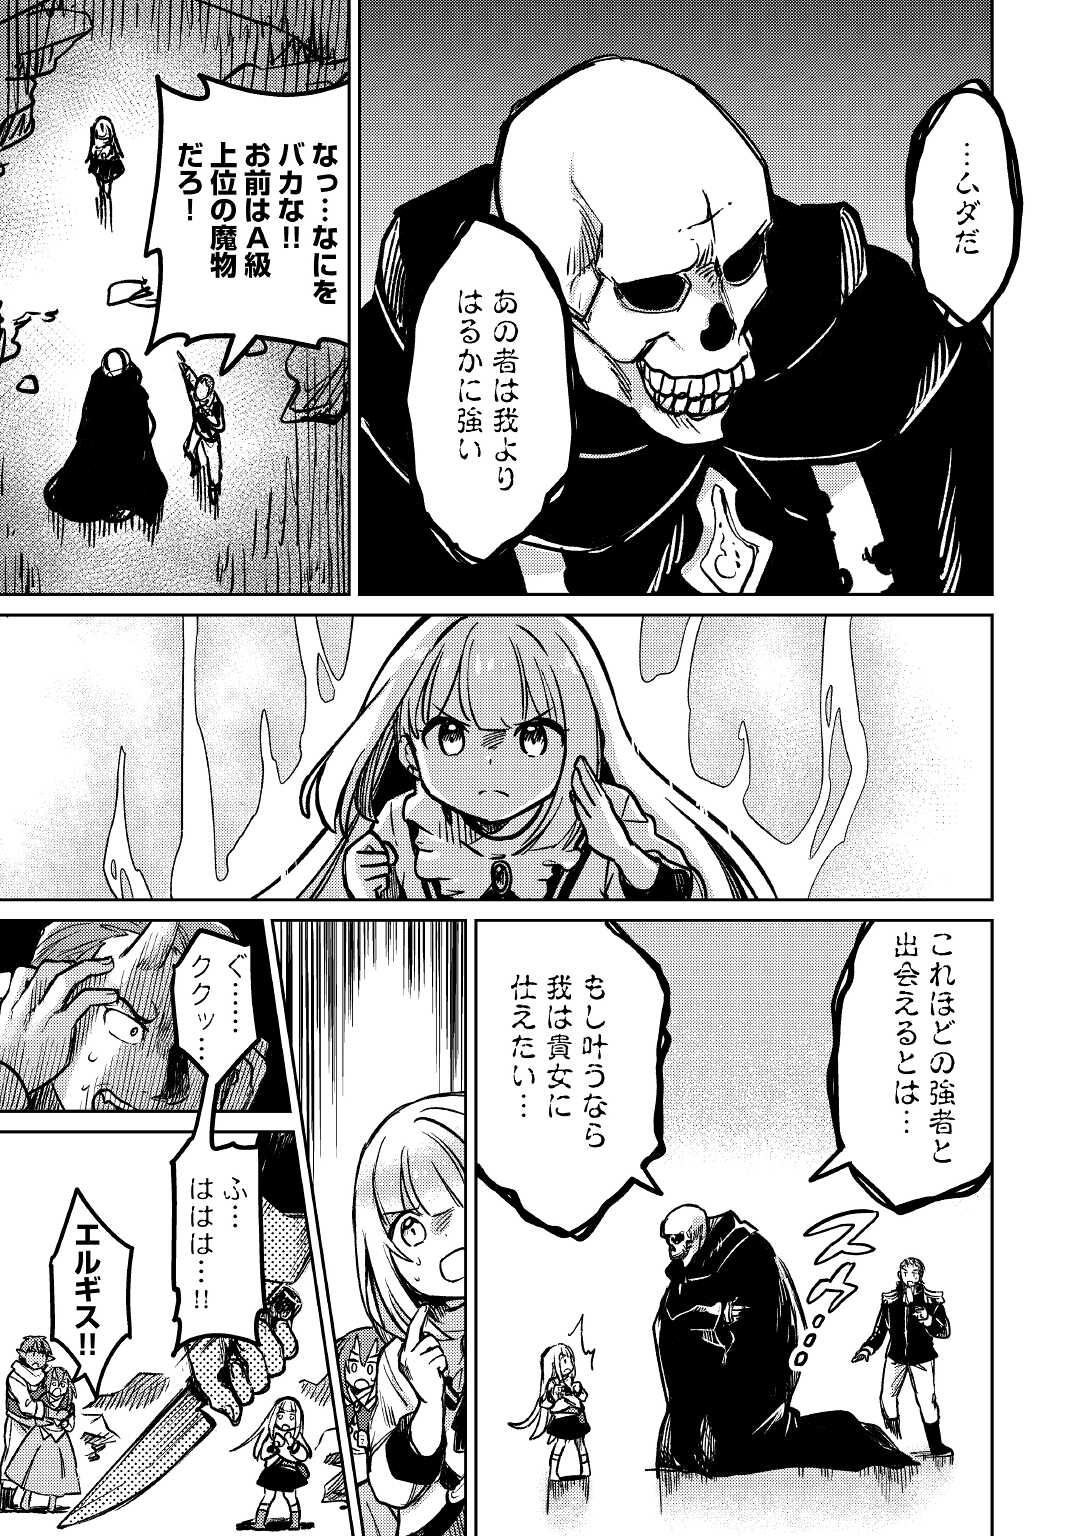 The Former Structural Researcher’s Story of Otherworldly Adventure 第39話 - Page 27